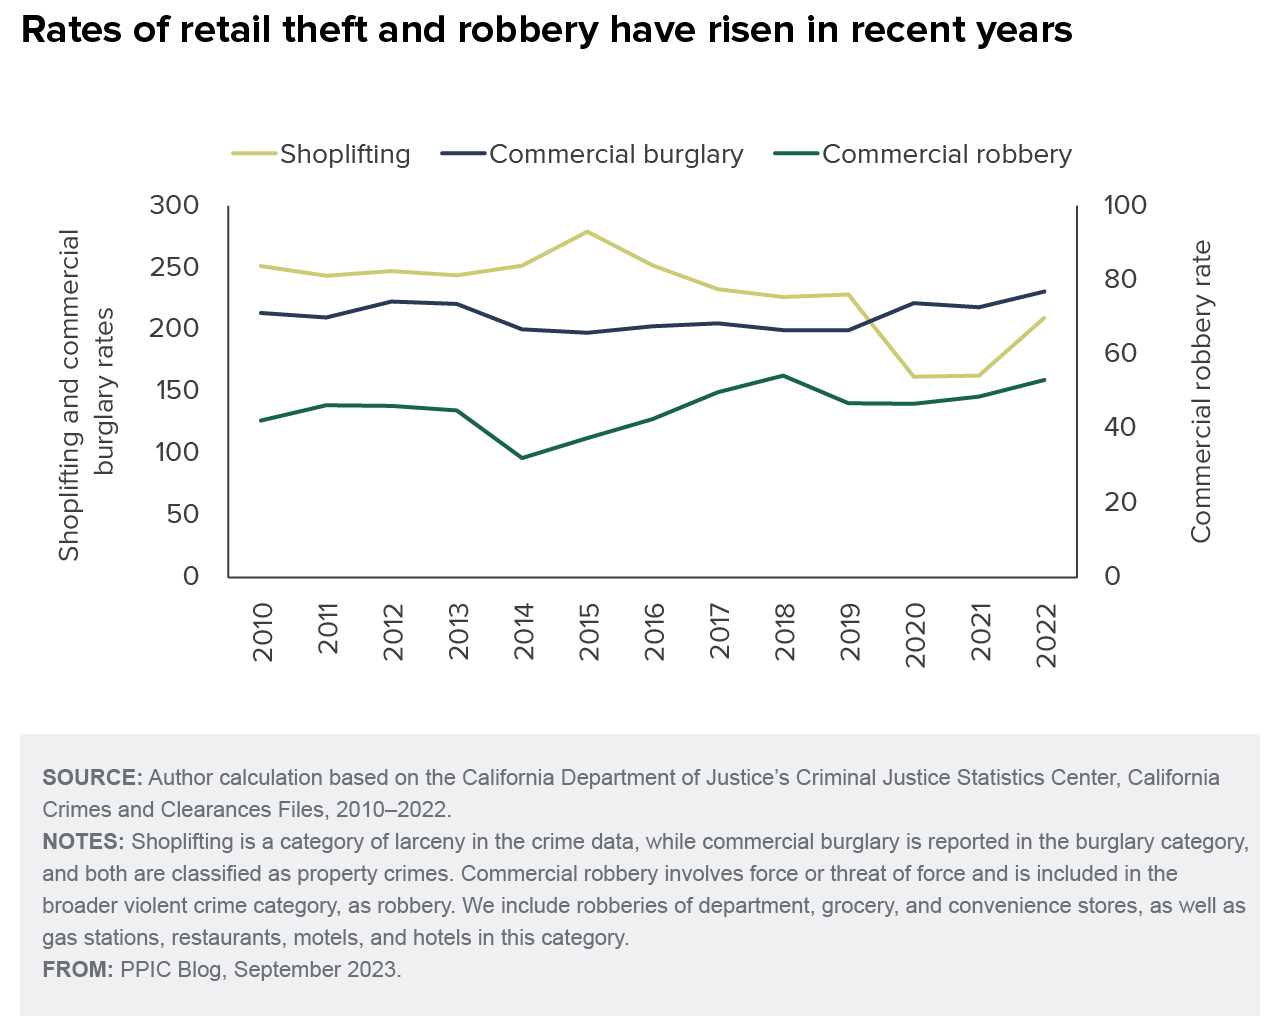 figure - Rates of retail theft and robbery have risen in recent years